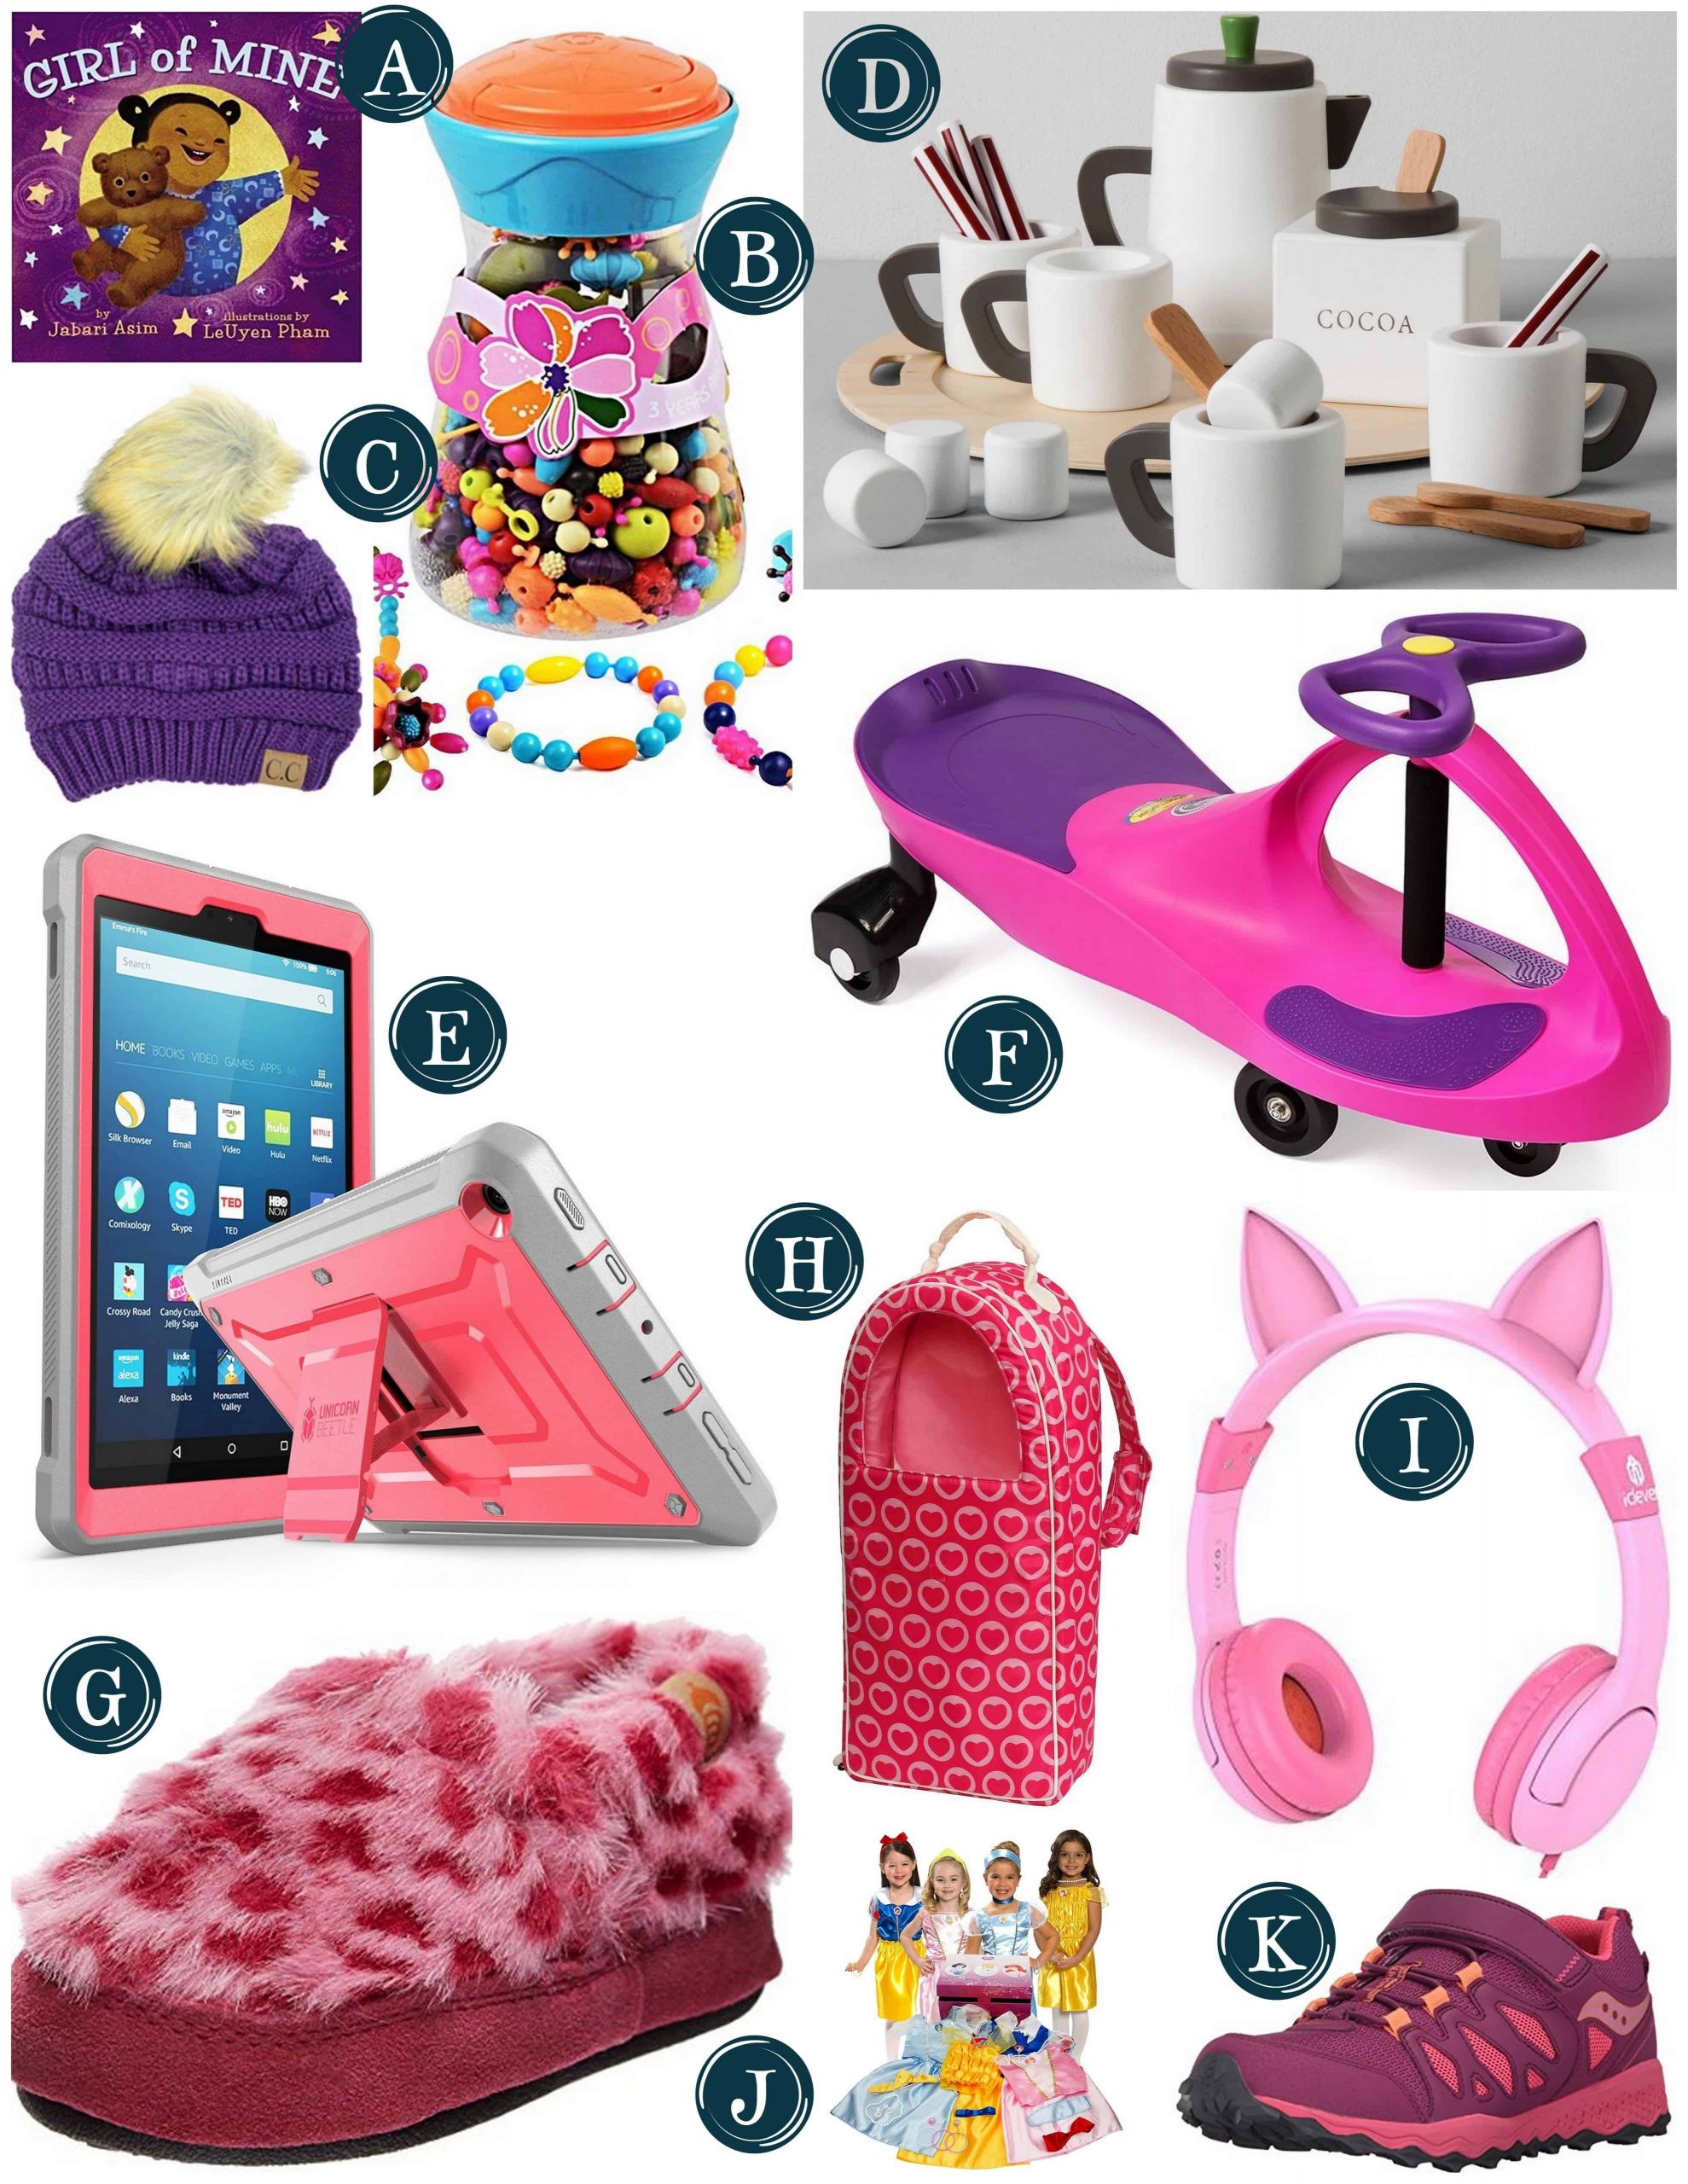 Good Gift Ideas for Girls Awesome Gift Guide for Little Girls Christmas Gift Ideas for Girls